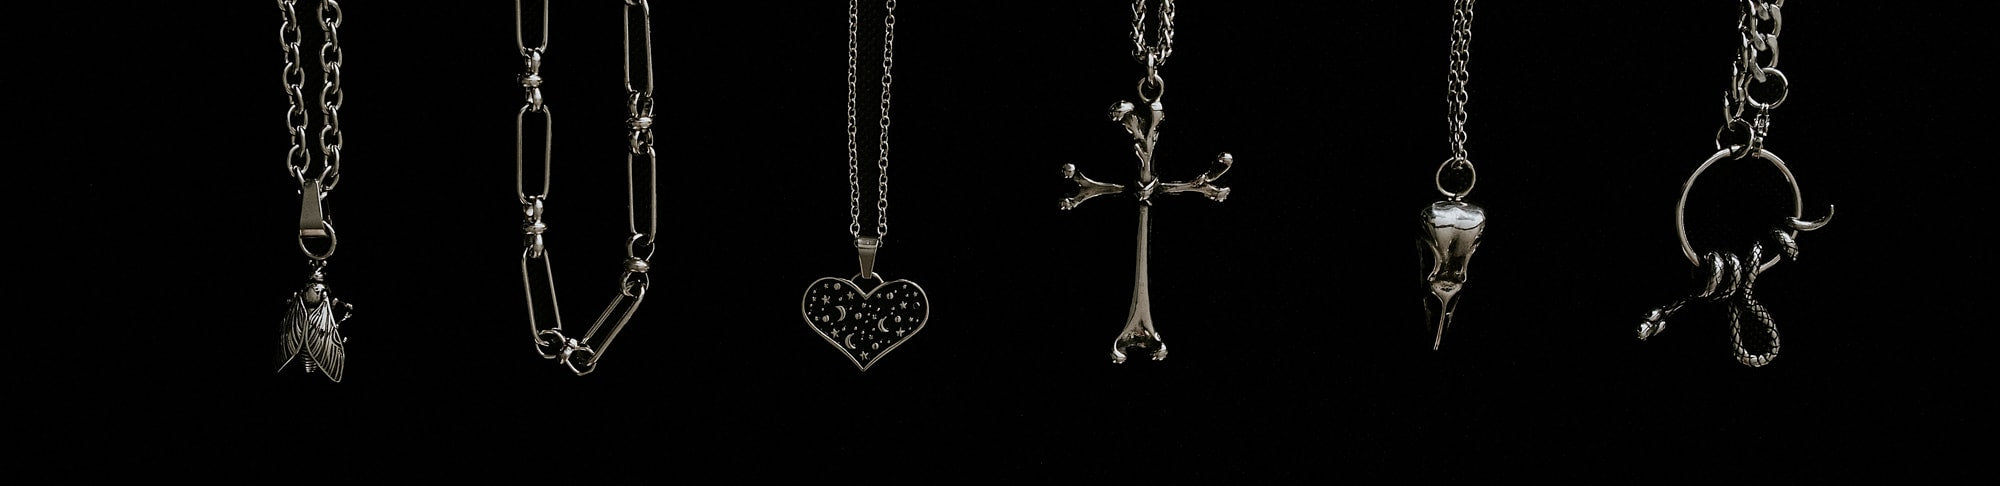 Mysticum Luna Gothic Necklaces are designed in house to fulfil your deathly desires. Experience our wide range of beautifully crafted stainless steel statement chokers or accessorise with envy inducing everyday wear Gothic necklaces.